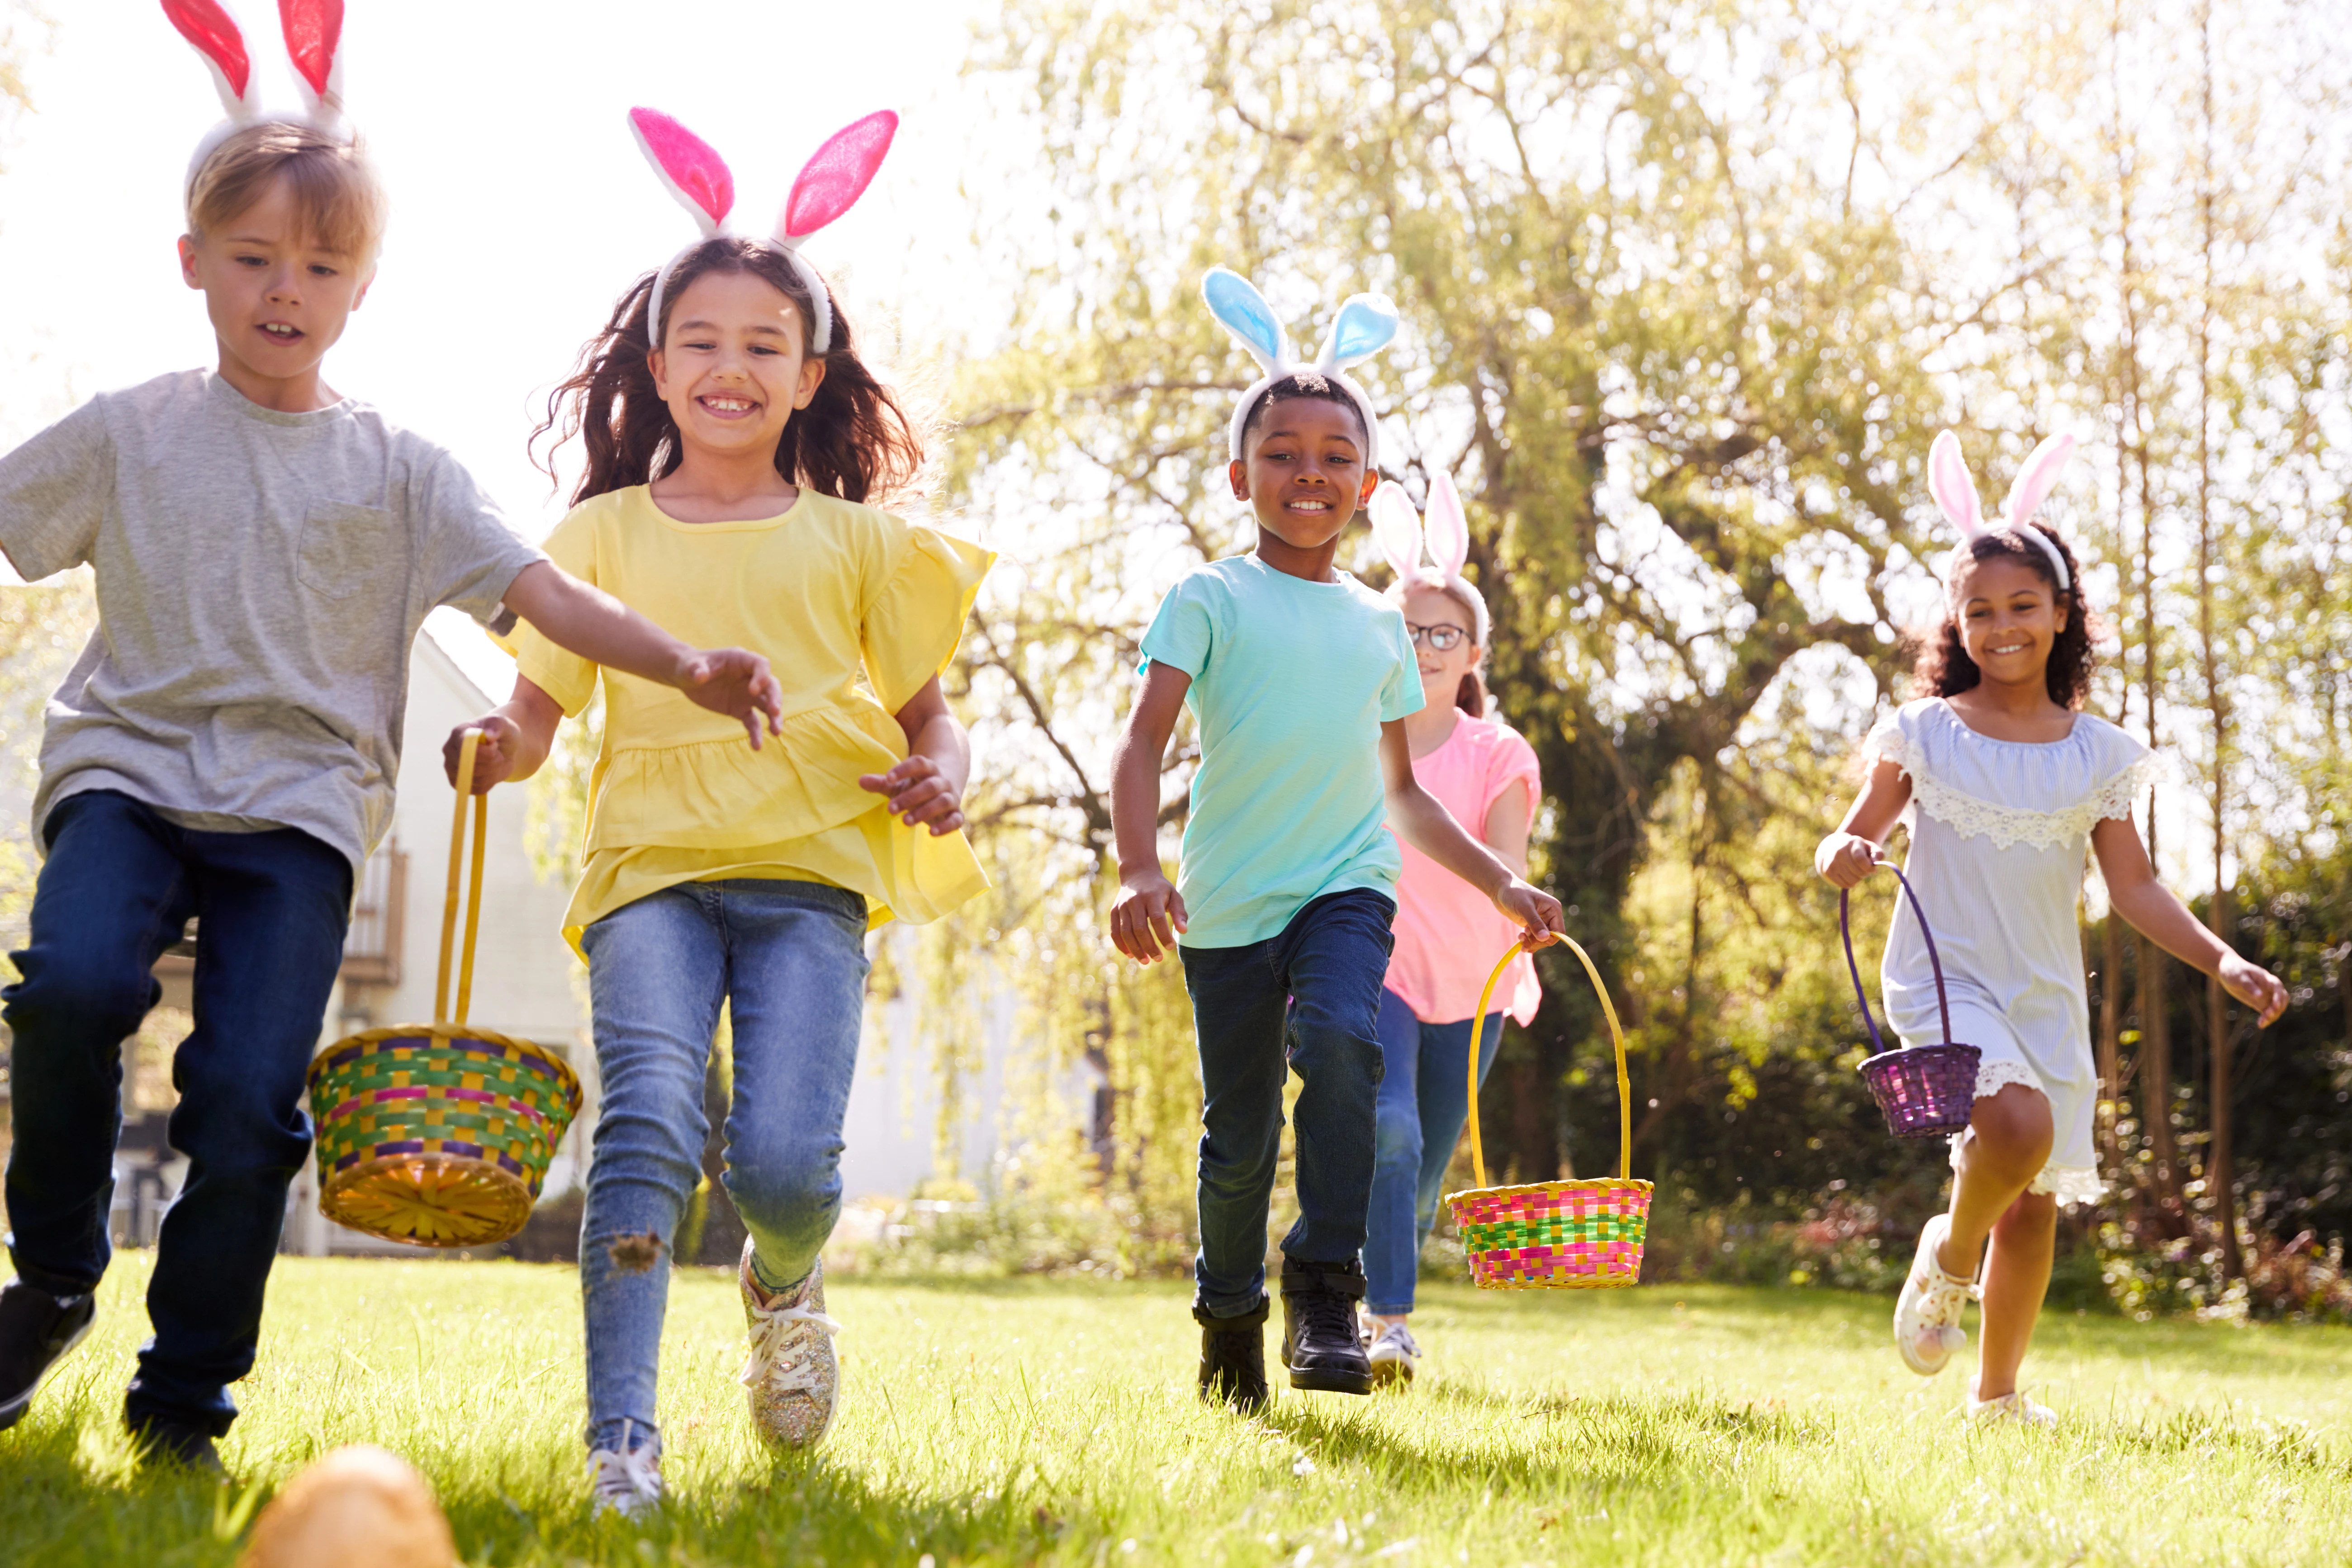 Children search for Easter eggs